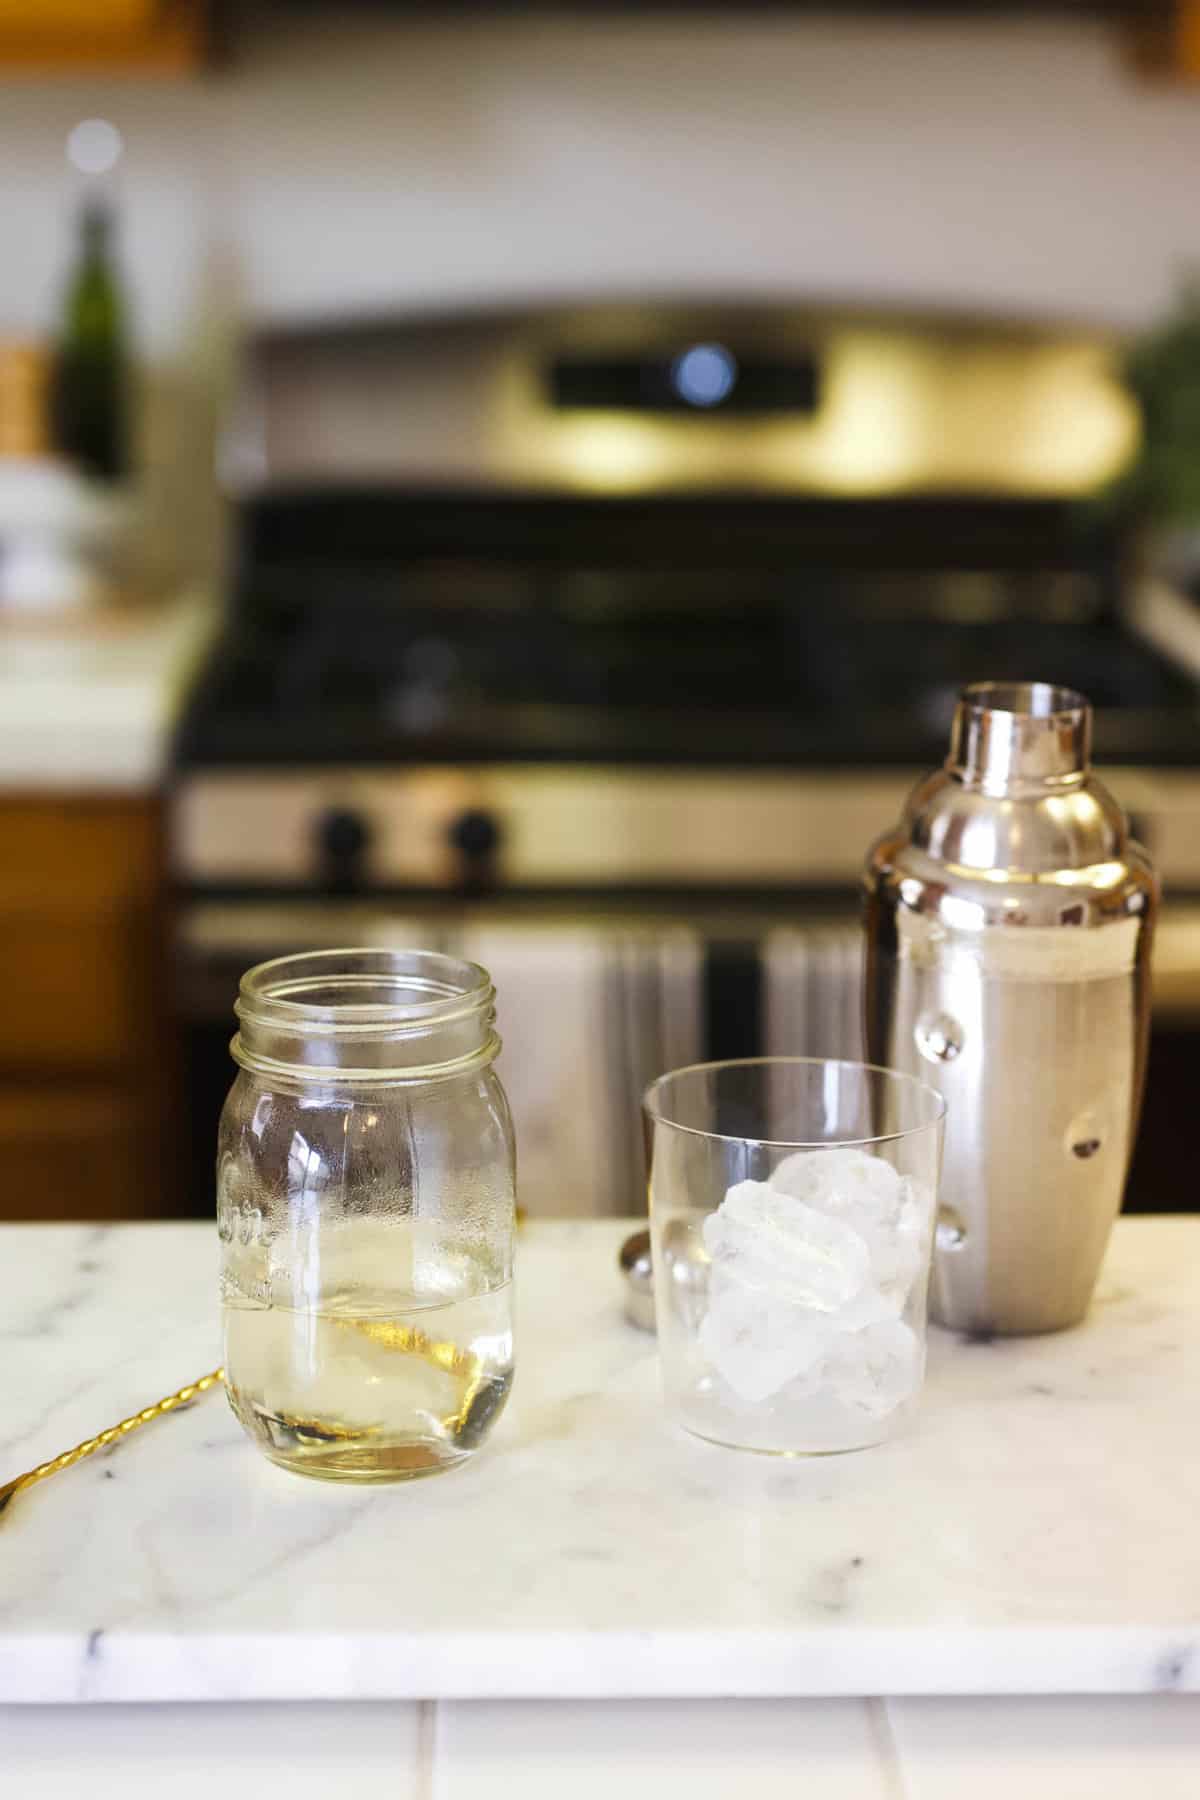 A jar of simple syrup on a counter next to a cocktail shaker and a short glass with ice.